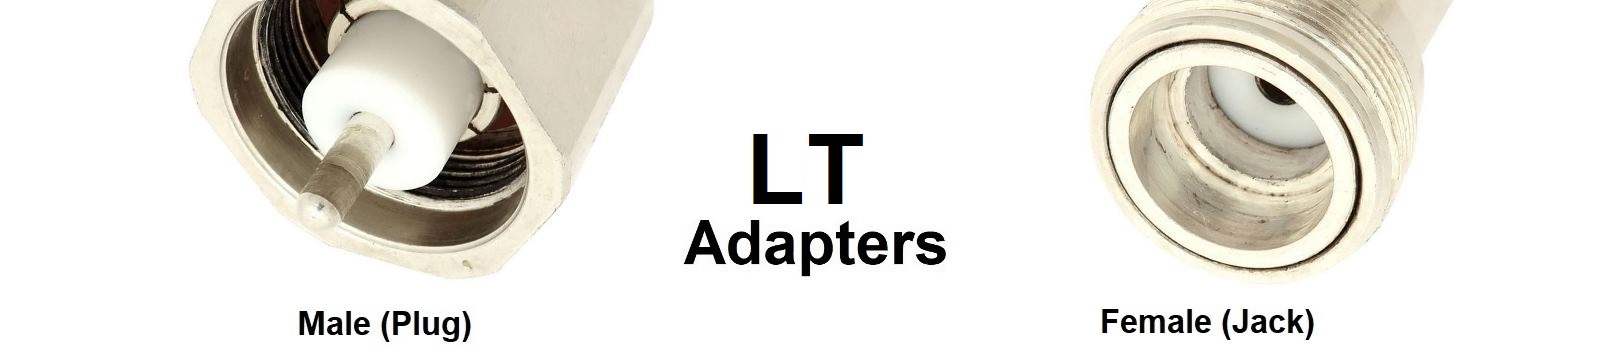 LT Adapters Category Banner - Max-Gain Systems, Inc.